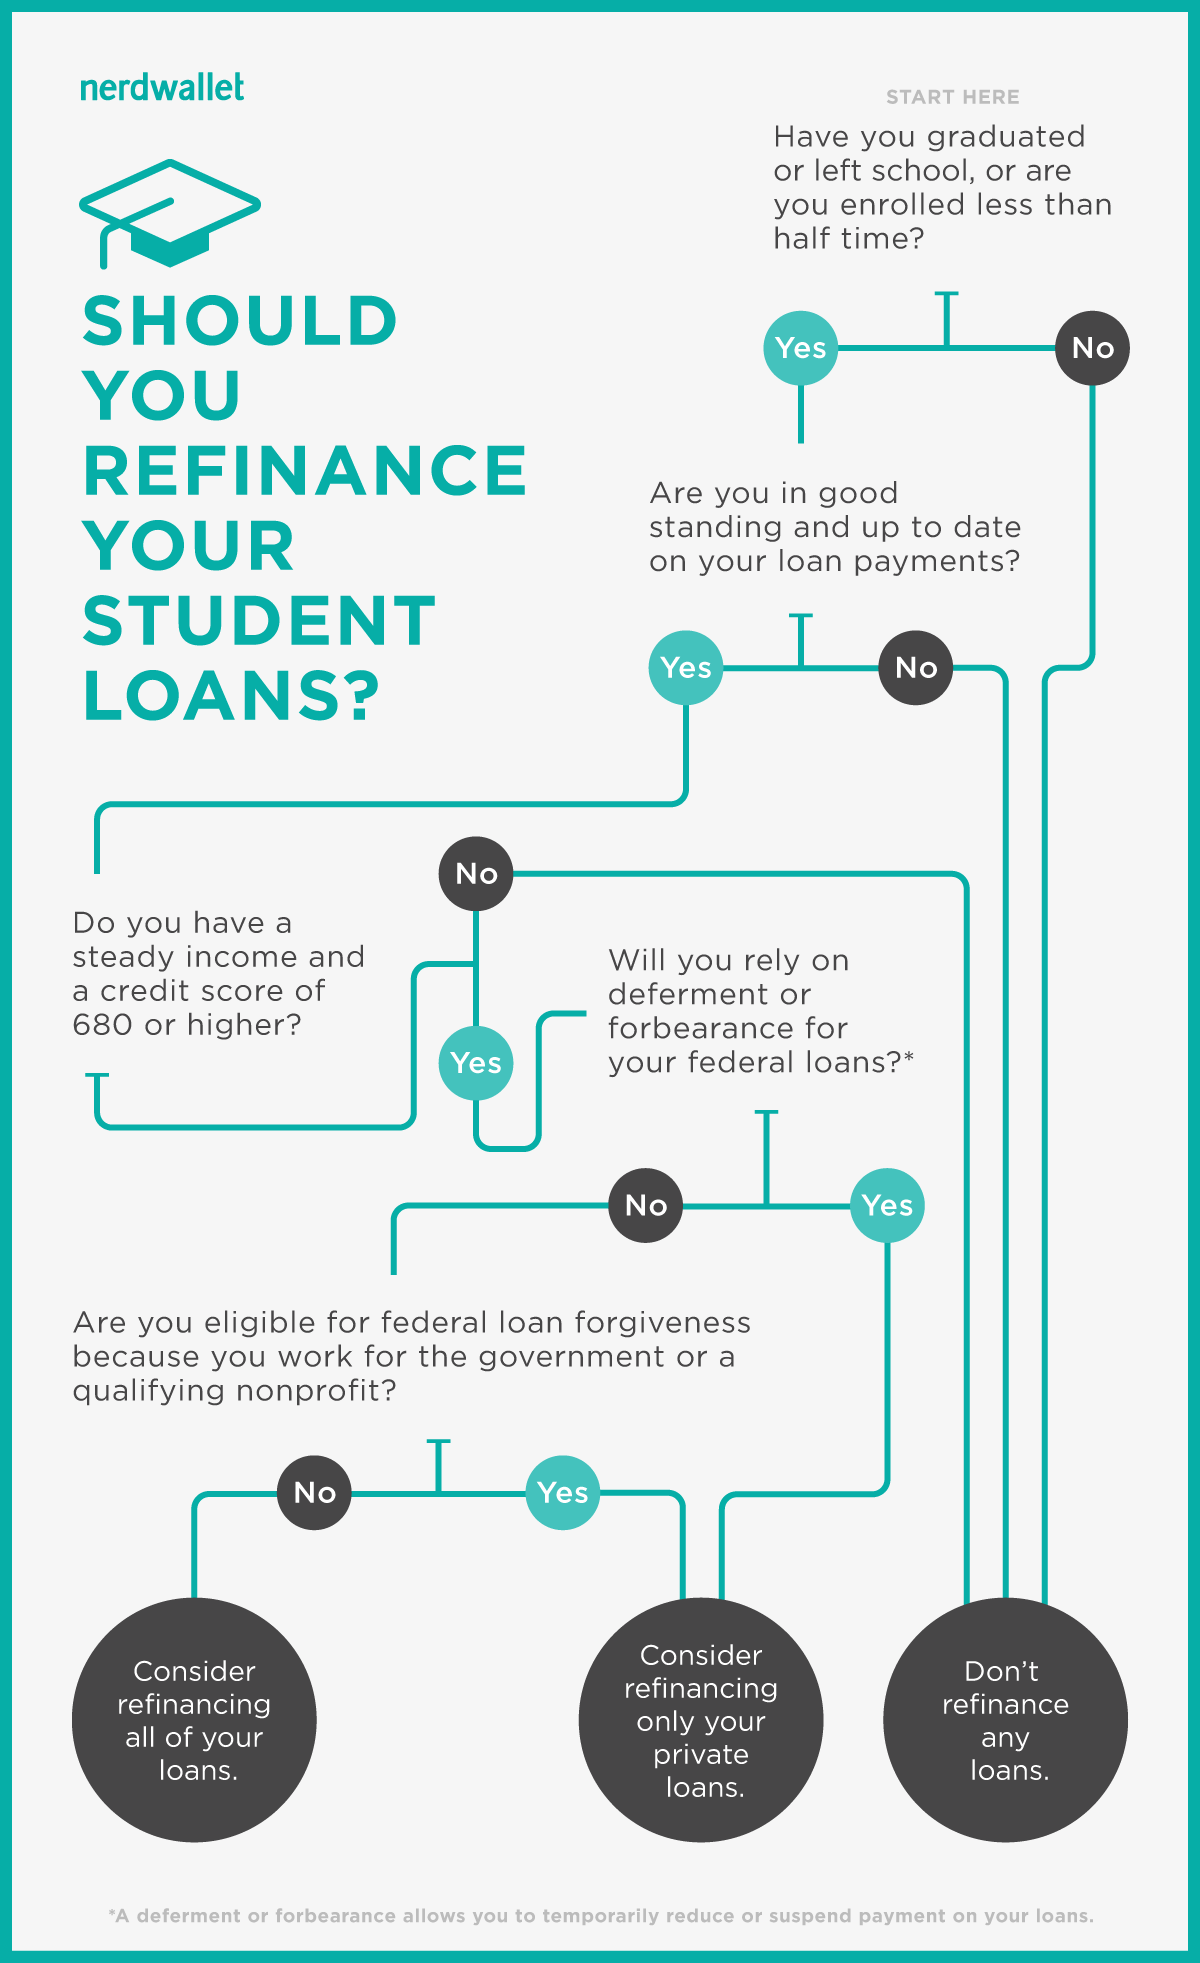 Rate Of Student Loan Repayments